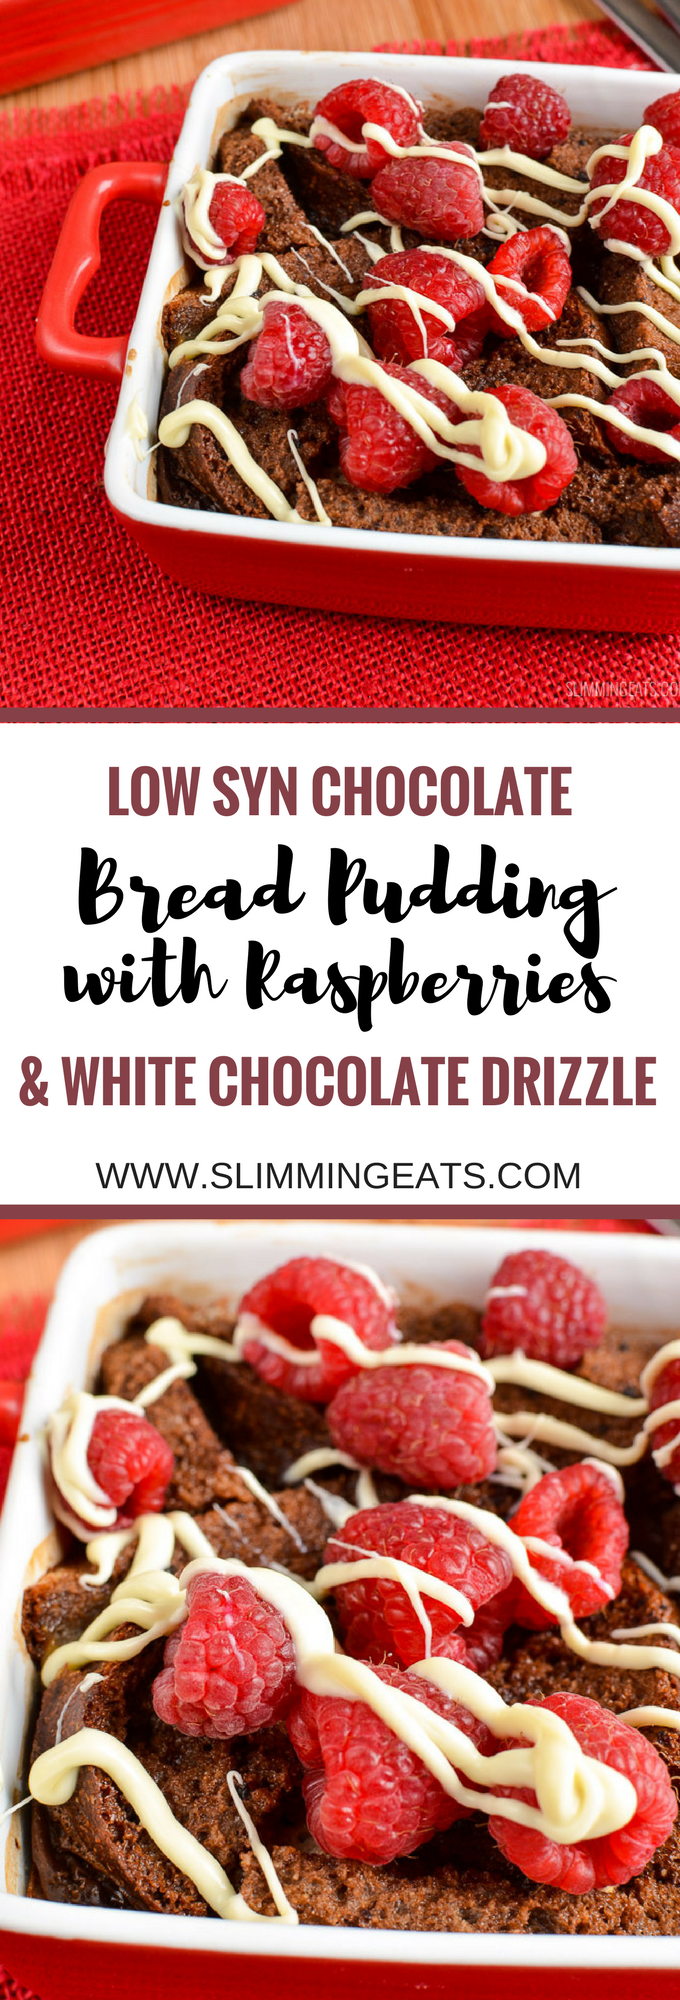 Slimming Eats Chocolate Bread Pudding with Raspberries and White Chocolate Drizzle - vegetarian friendly, Slimming World and Weight Watchers friendly